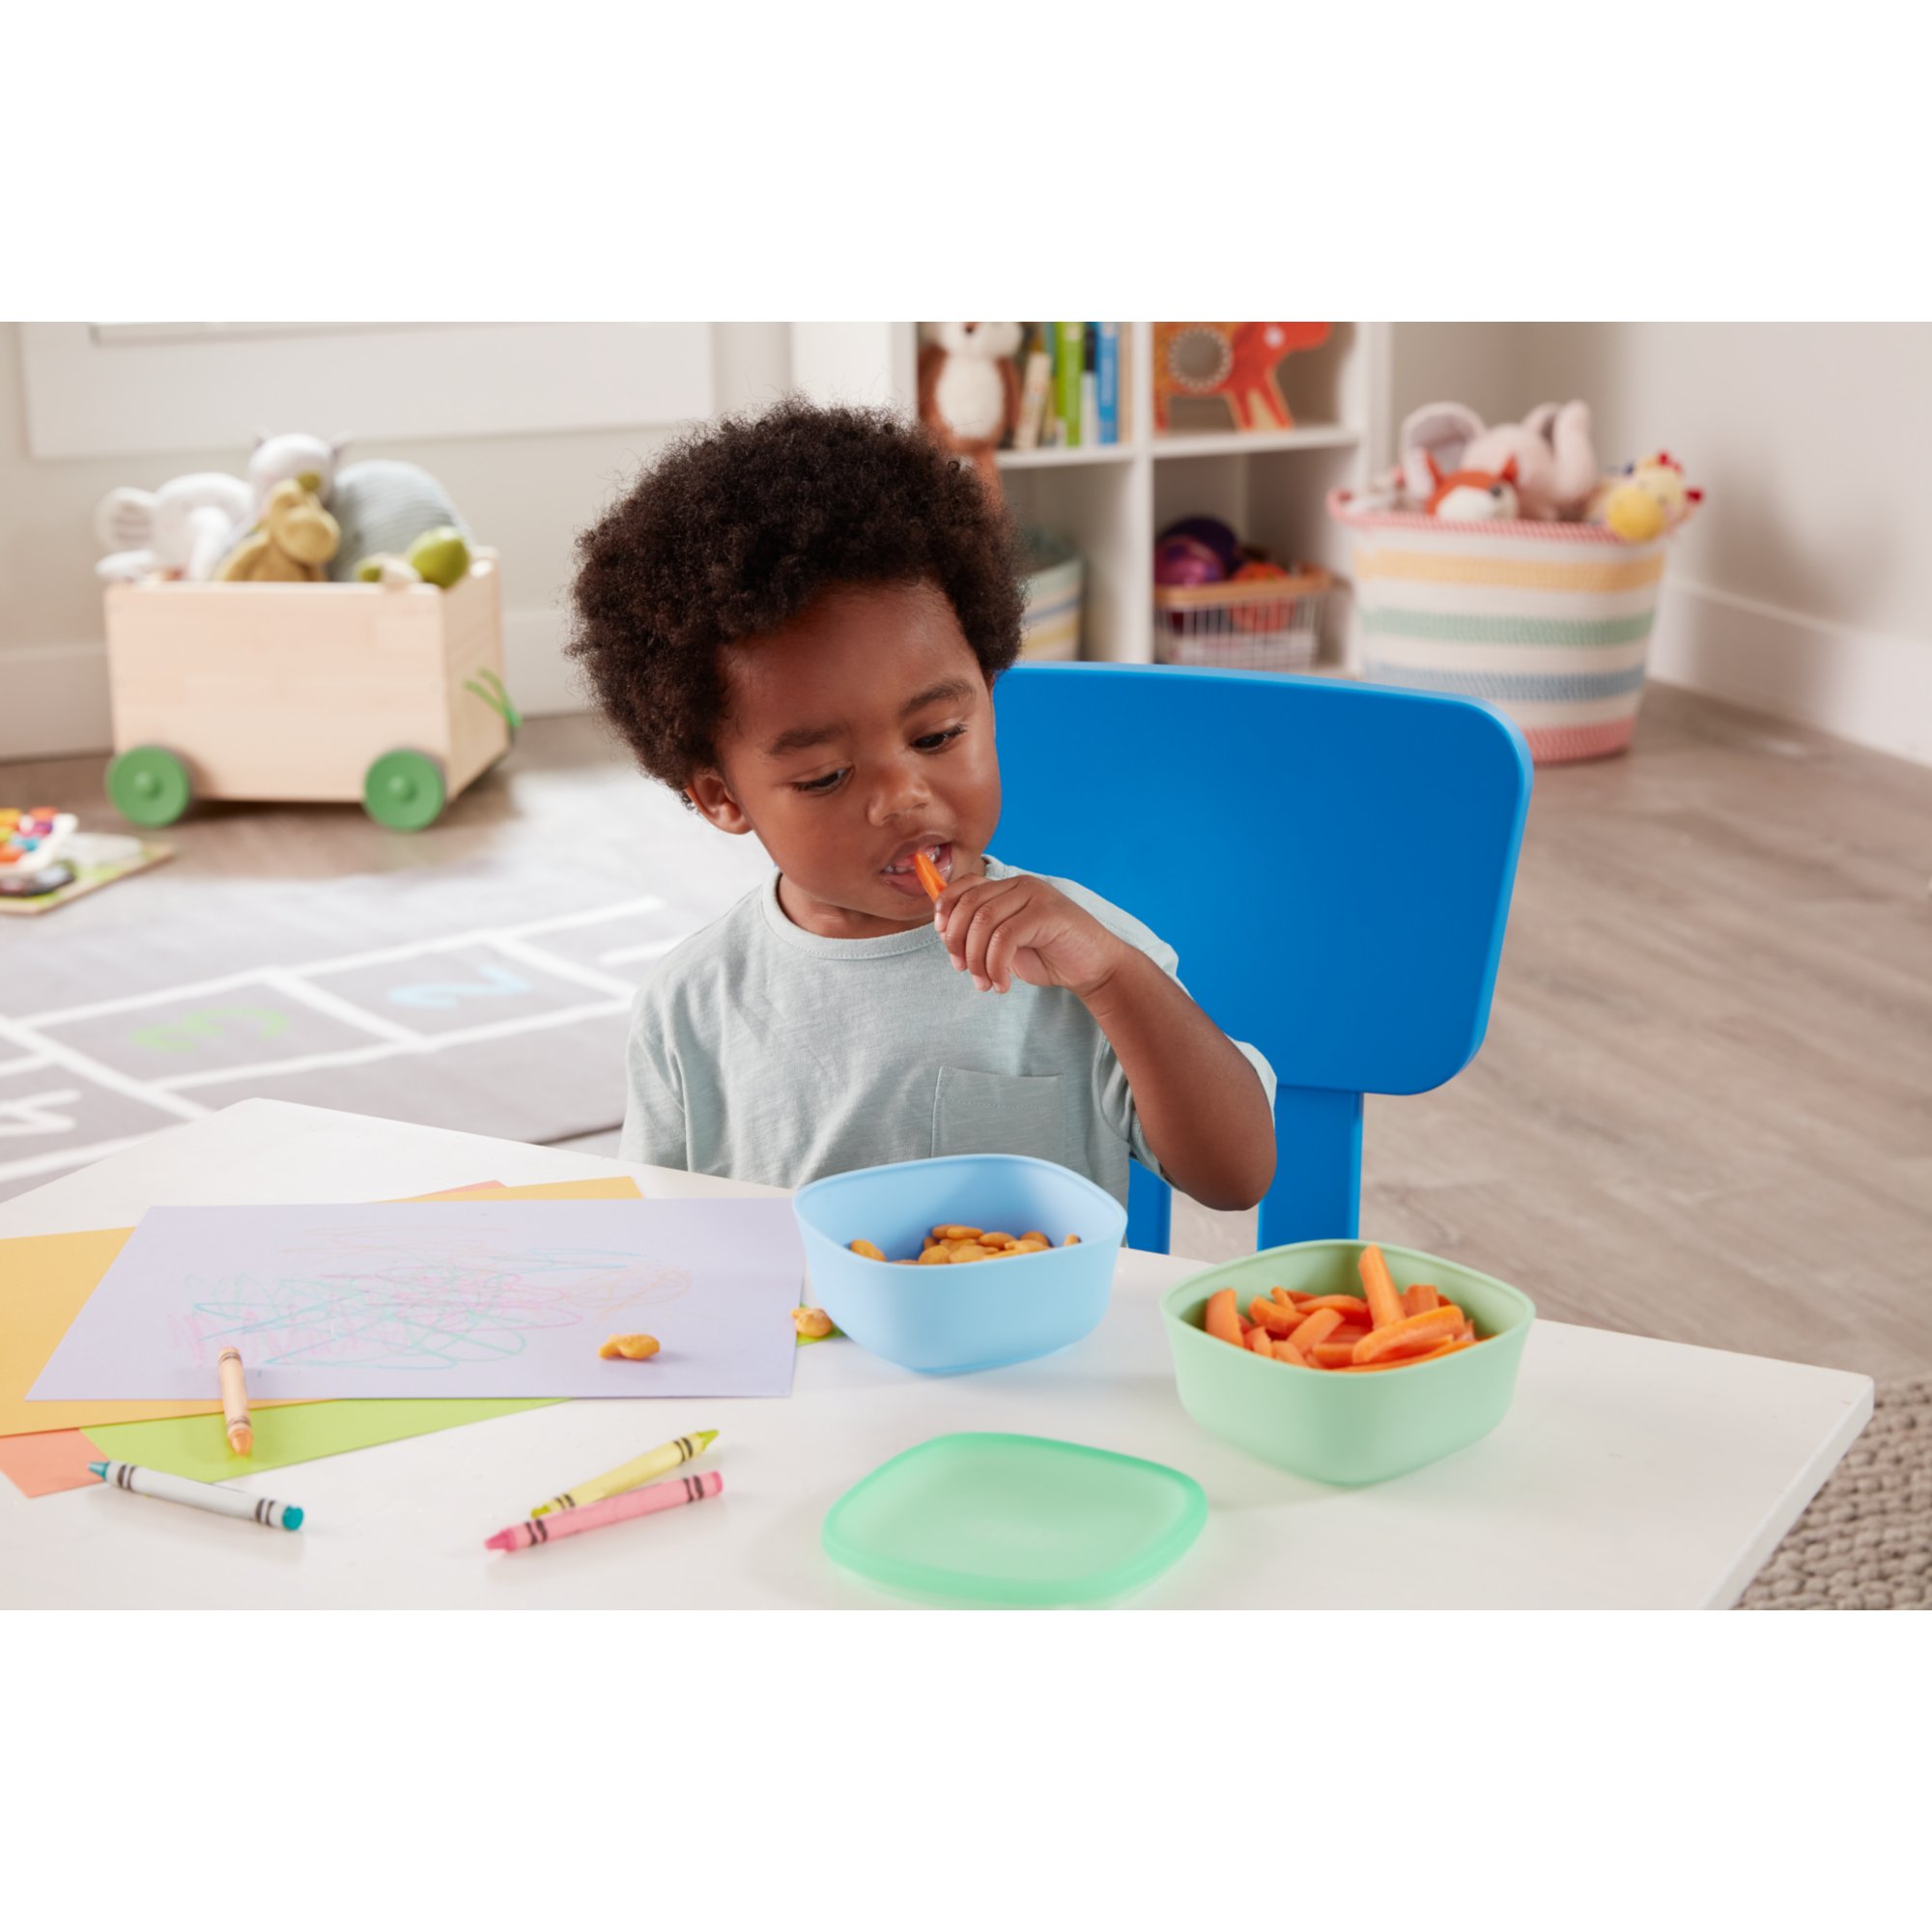 https://s7d9.scene7.com/is/image/NewellRubbermaid/NUK_Stacking_Bowl_Older%20Toddler_Snacking_Lifestyle_0075?wid=2000&hei=2000